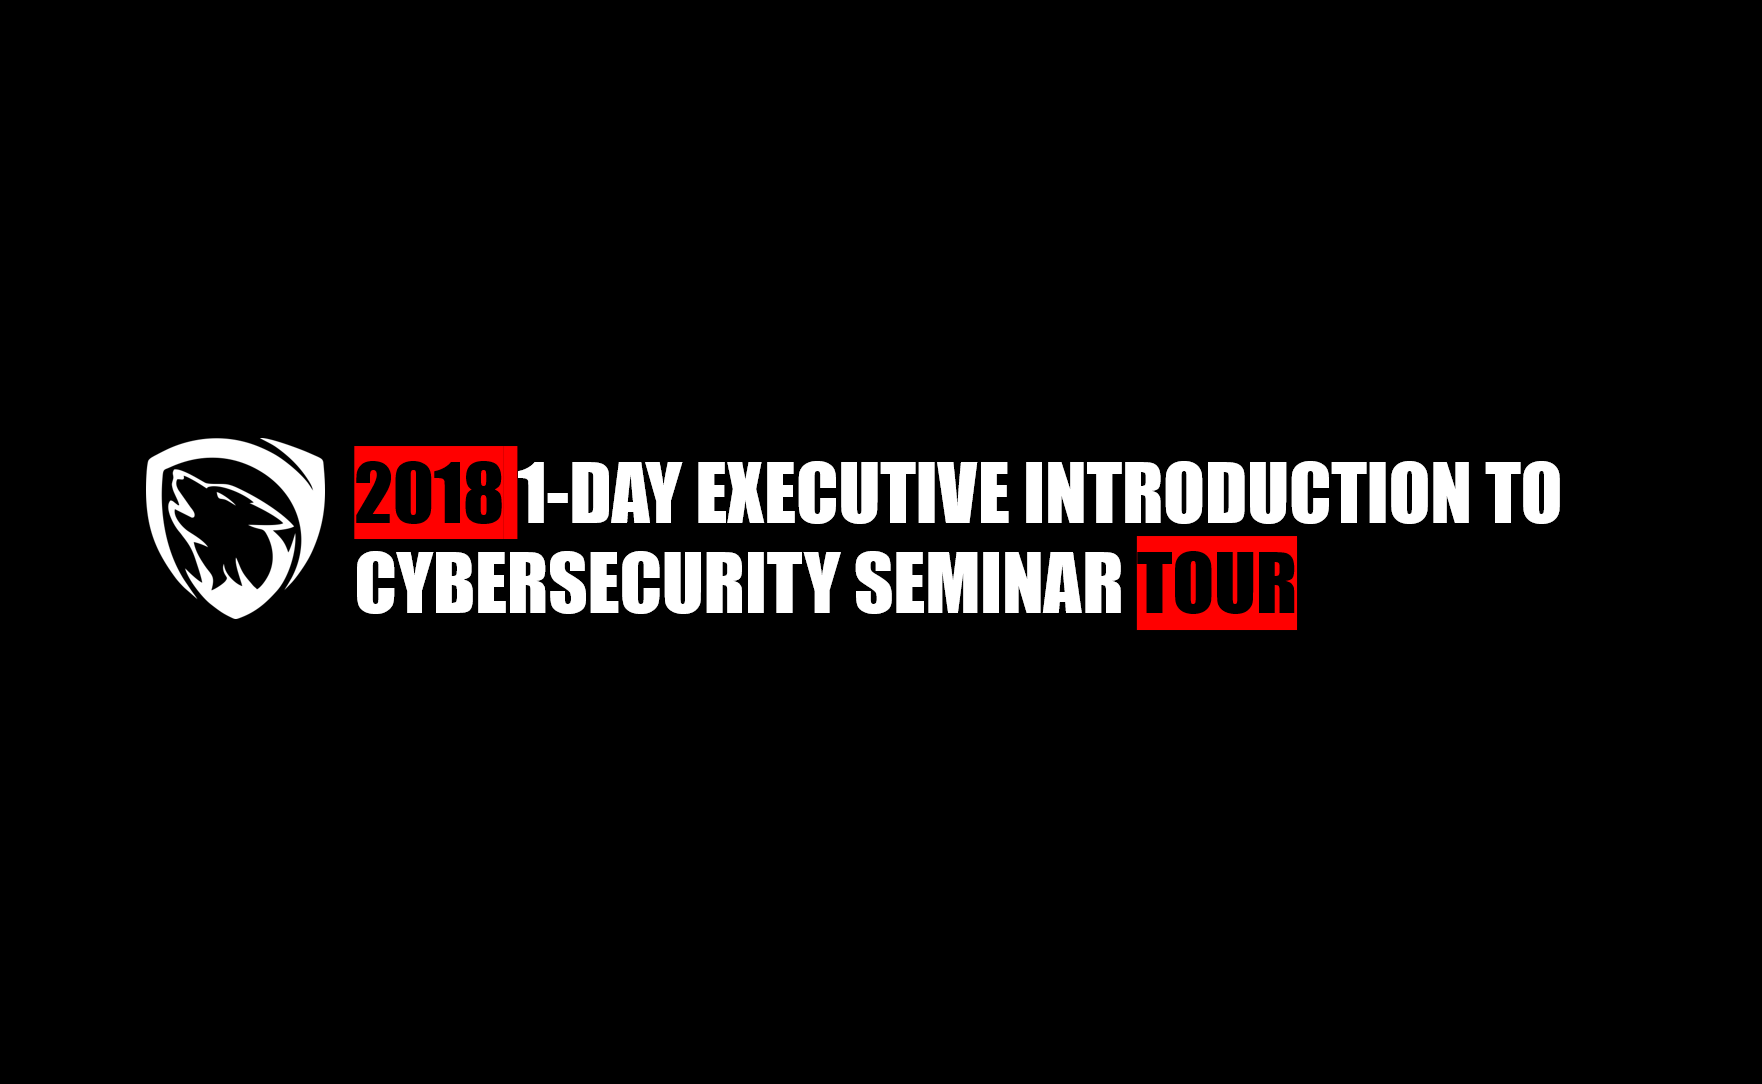 2018 Executive Education Introduction to Cybersecurity Seminar